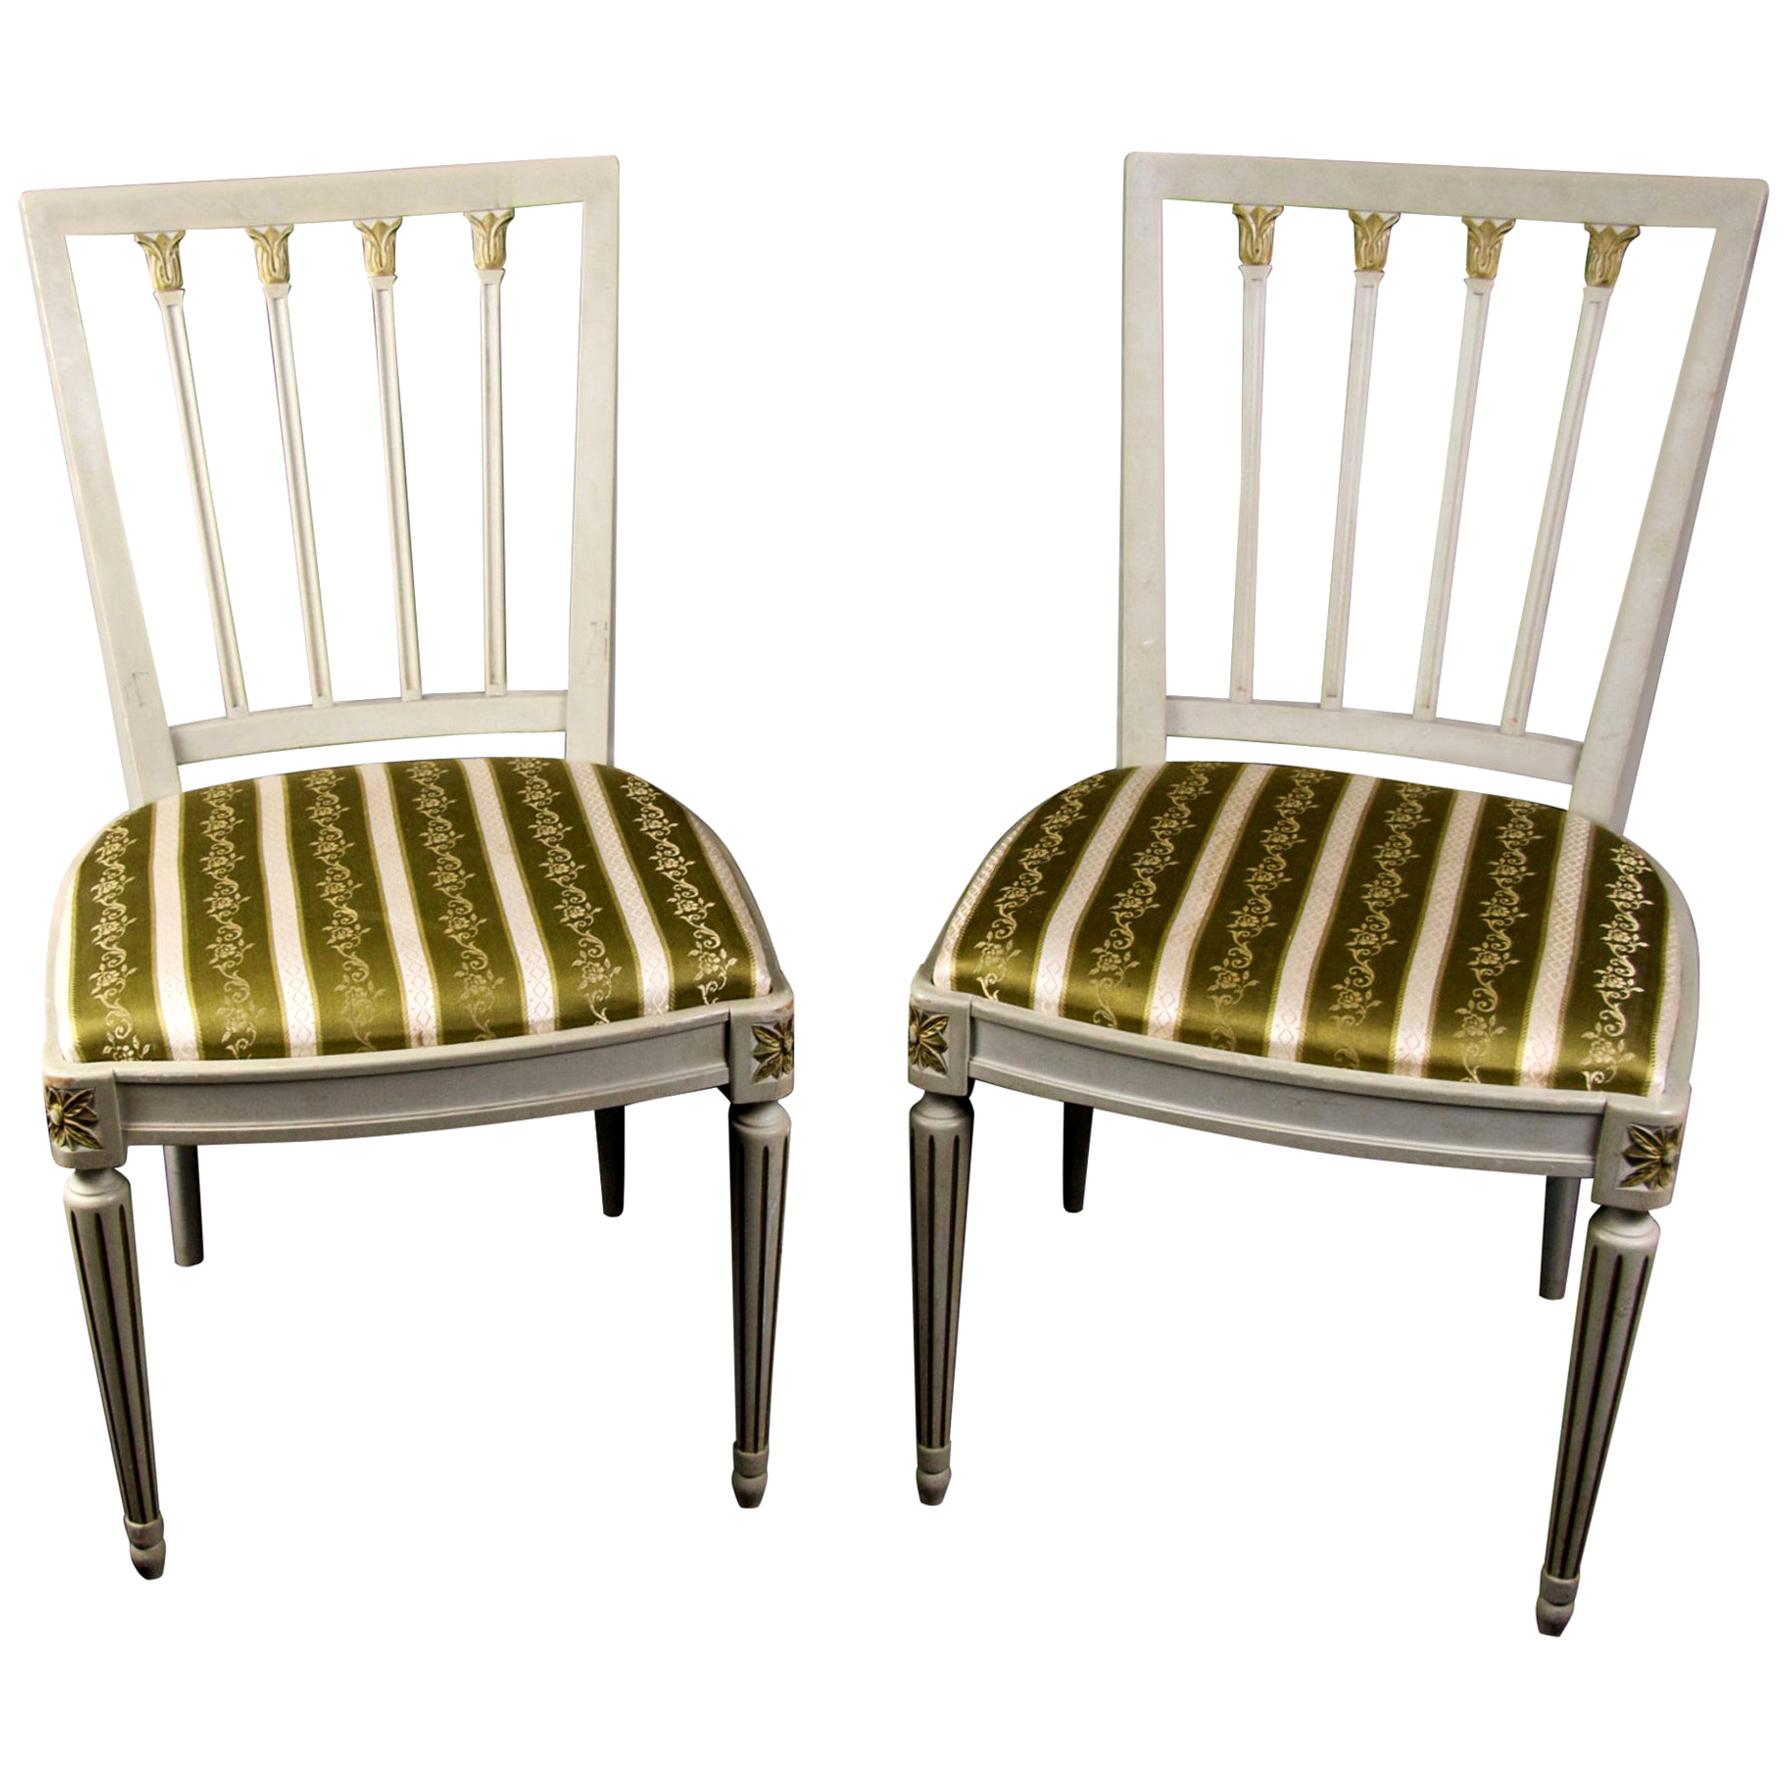 Gustavian Leksand Swedish Dining Chairs Pair in Gilt, 20th Century For Sale